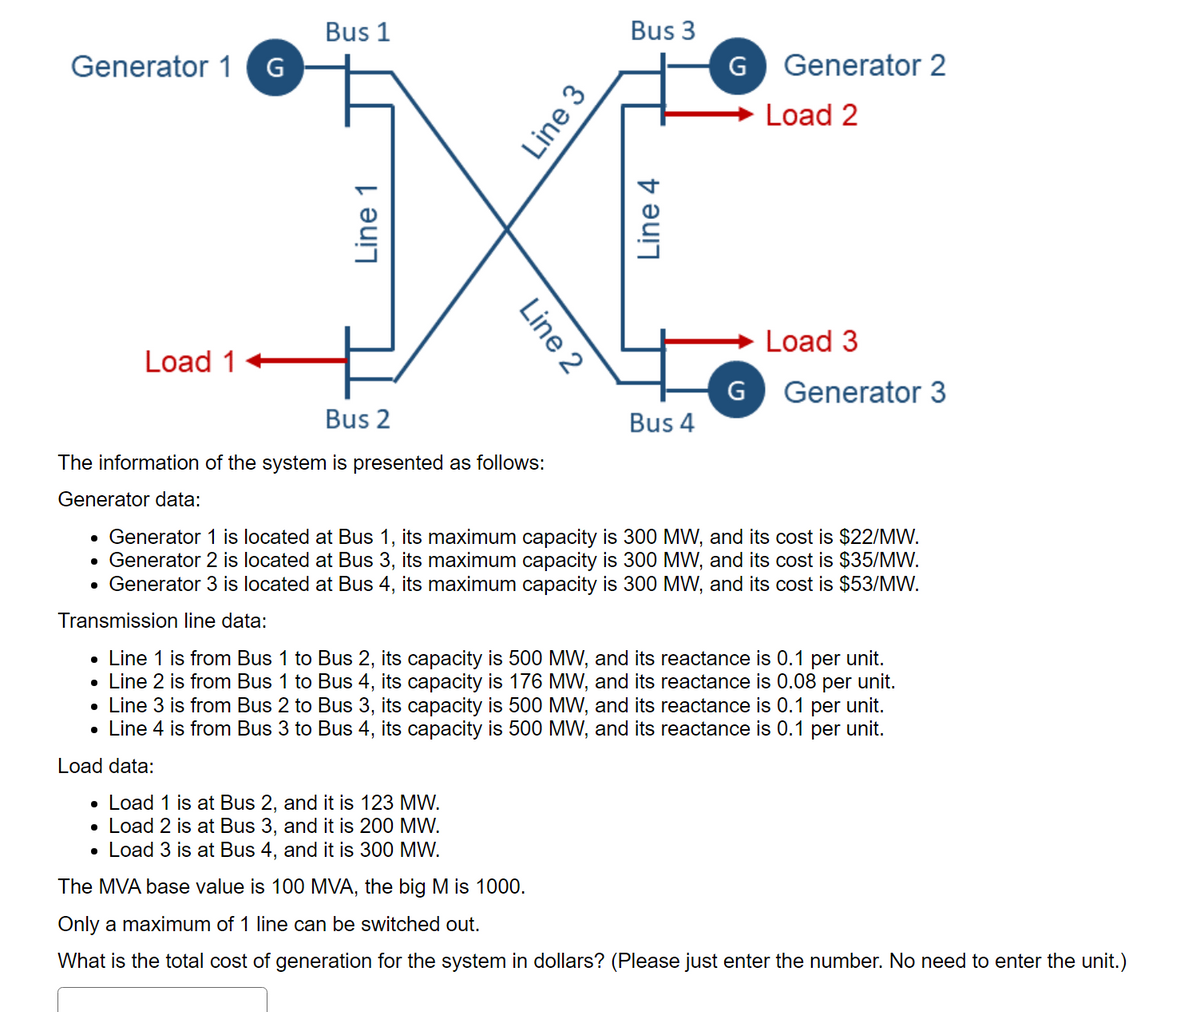 Generator 1 G
Bus 1
Line 1
Load 1
Bus 2
The information of the system is presented as follows:
Generator data:
Line 3
Line 2
Bus 3
G Generator 2
Load 2
Line 4
G
Bus 4
Load 3
Generator 3
• Generator 1 is located at Bus 1, its maximum capacity is 300 MW, and its cost is $22/MW.
Generator 2 is located at Bus 3, its maximum capacity is 300 MW, and its cost is $35/MW.
•
• Generator 3 is located at Bus 4, its maximum capacity is 300 MW, and its cost is $53/MW.
Transmission line data:
Line 1 is from Bus 1 to Bus 2, its capacity is 500 MW, and its reactance is 0.1 per unit.
• Line 2 is from Bus 1 to Bus 4, its capacity is 176 MW, and its reactance is 0.08 per unit.
• Line 3 is from Bus 2 to Bus 3, its capacity is 500 MW, and its reactance is 0.1 per unit.
Line 4 is from Bus 3 to Bus 4, its capacity is 500 MW, and its reactance is 0.1 per unit.
Load data:
•
Load 1 is at Bus 2, and it is 123 MW.
•
Load 2 is at Bus 3, and it is 200 MW.
• Load 3 is at Bus 4, and it is 300 MW.
The MVA base value is 100 MVA, the big M is 1000.
Only a maximum of 1 line can be switched out.
What is the total cost of generation for the system in dollars? (Please just enter the number. No need to enter the unit.)